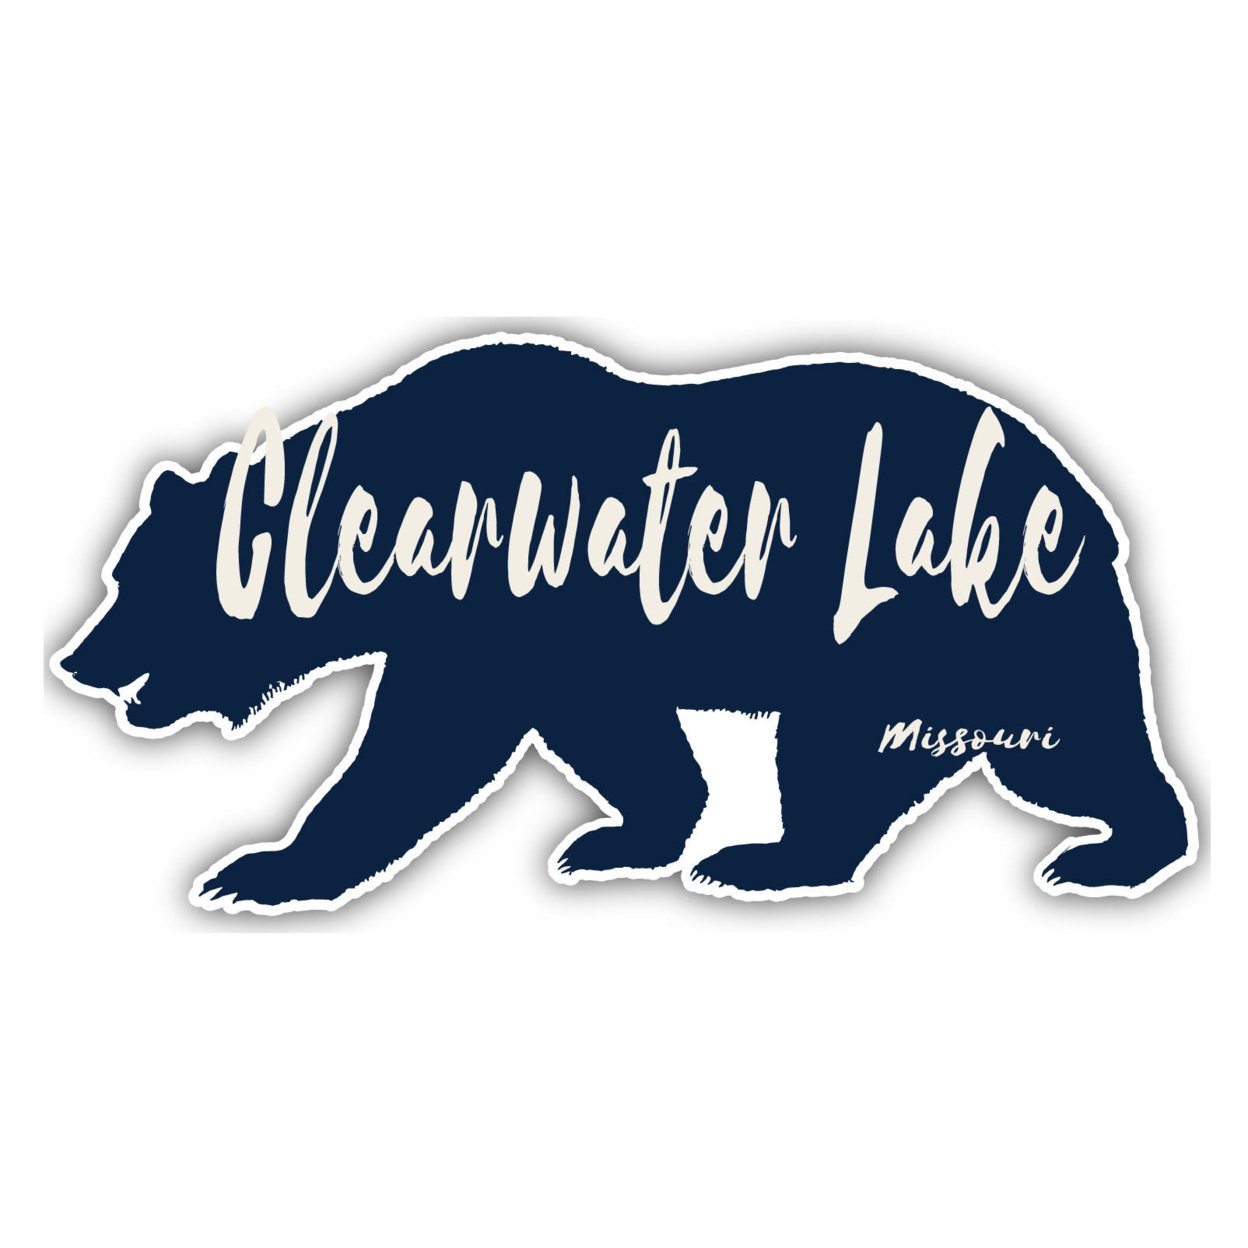 Clearwater Lake Missouri Souvenir Decorative Stickers (Choose Theme And Size) - 4-Pack, 8-Inch, Bear